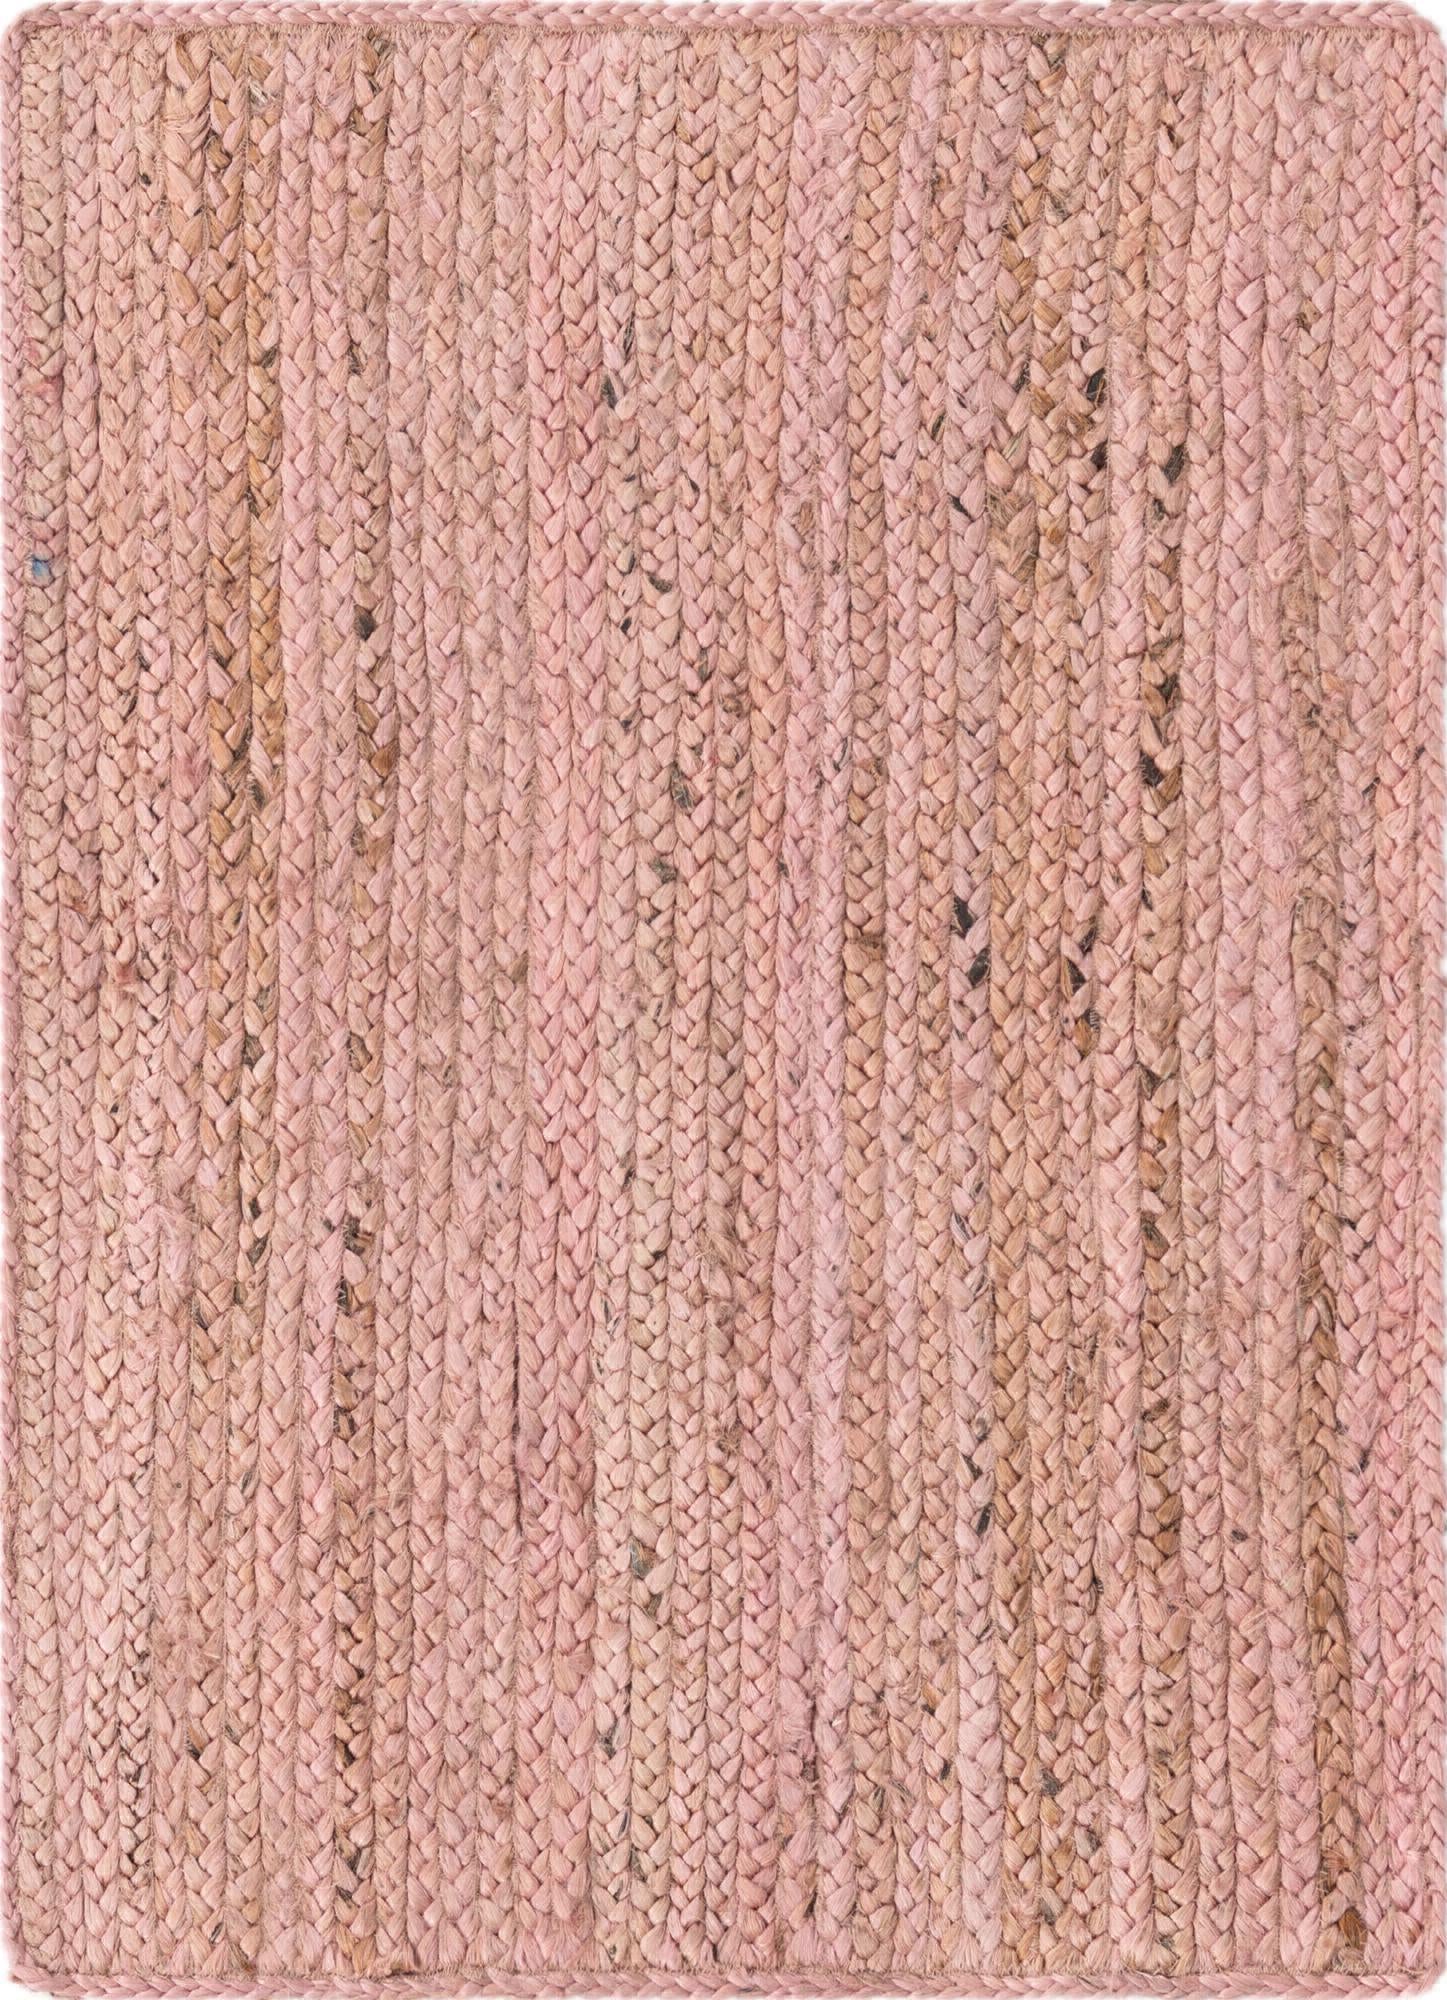 Unique Loom Braided Jute MGN-5-7-8 Light Pink Area Rug main image